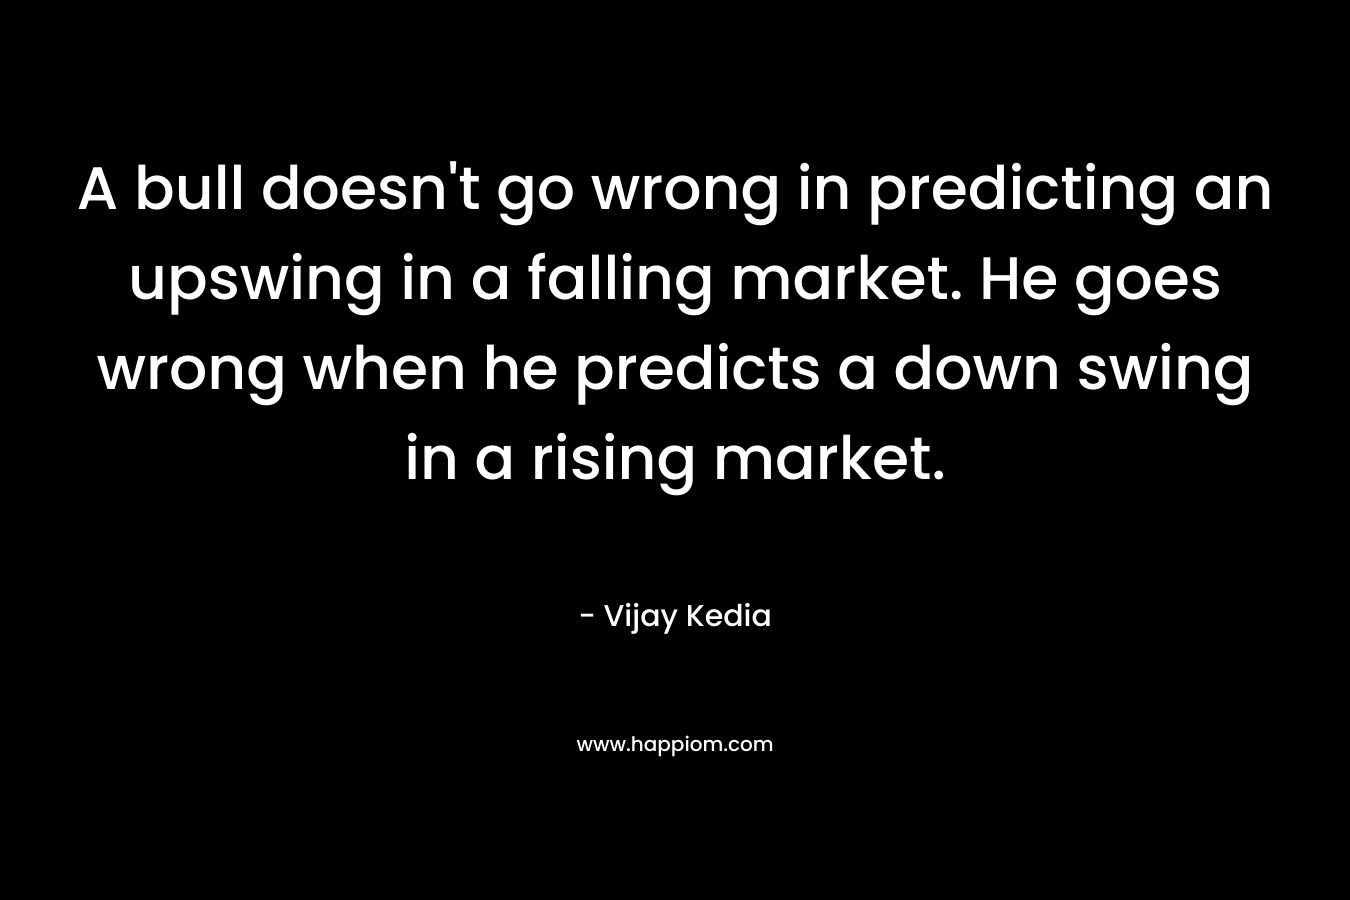 A bull doesn’t go wrong in predicting an upswing in a falling market. He goes wrong when he predicts a down swing in a rising market. – Vijay Kedia